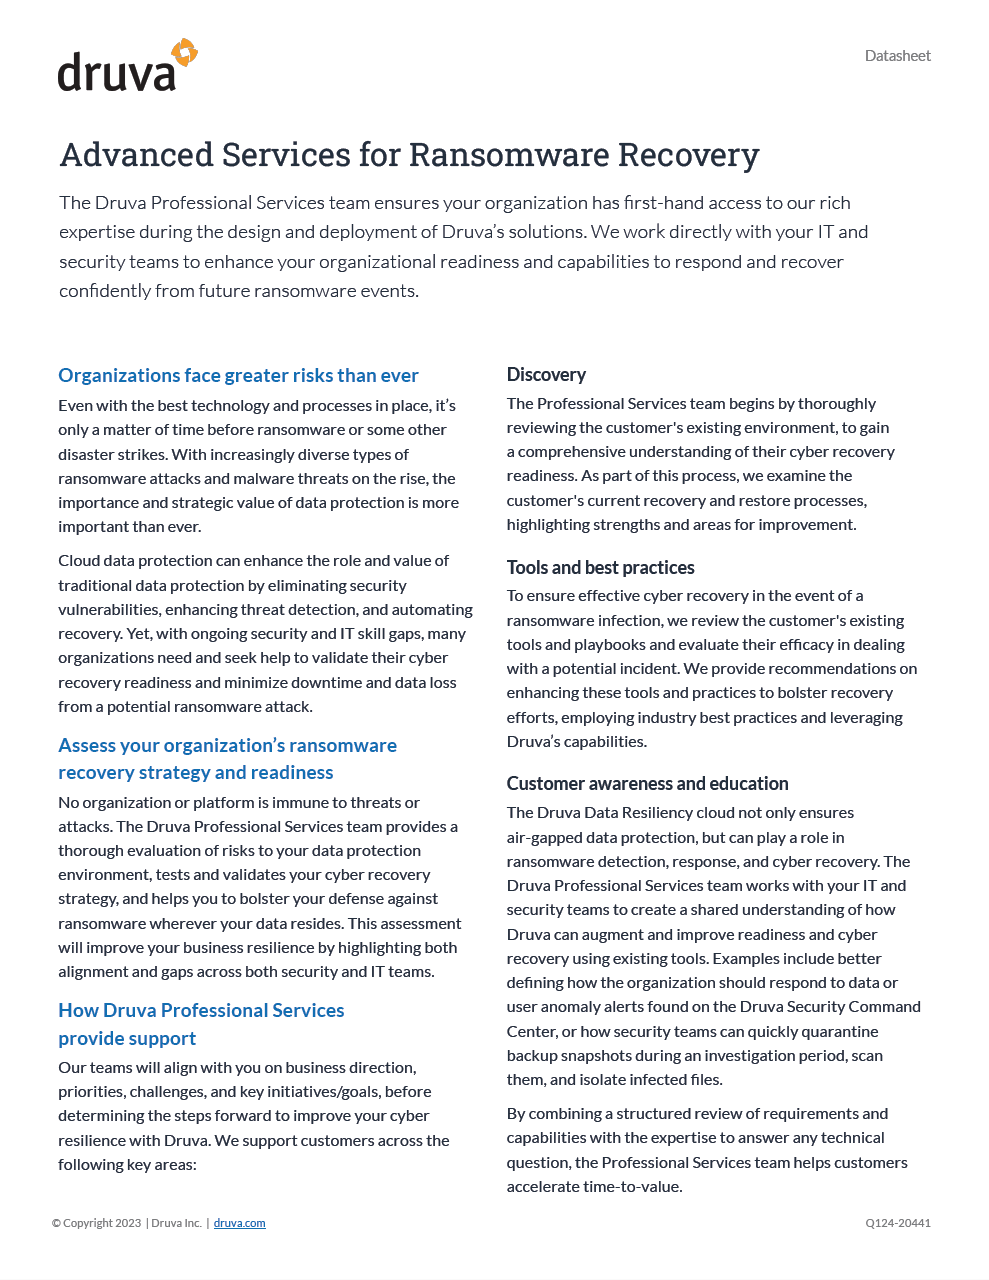 Advanced Services for Ransomware Recovery